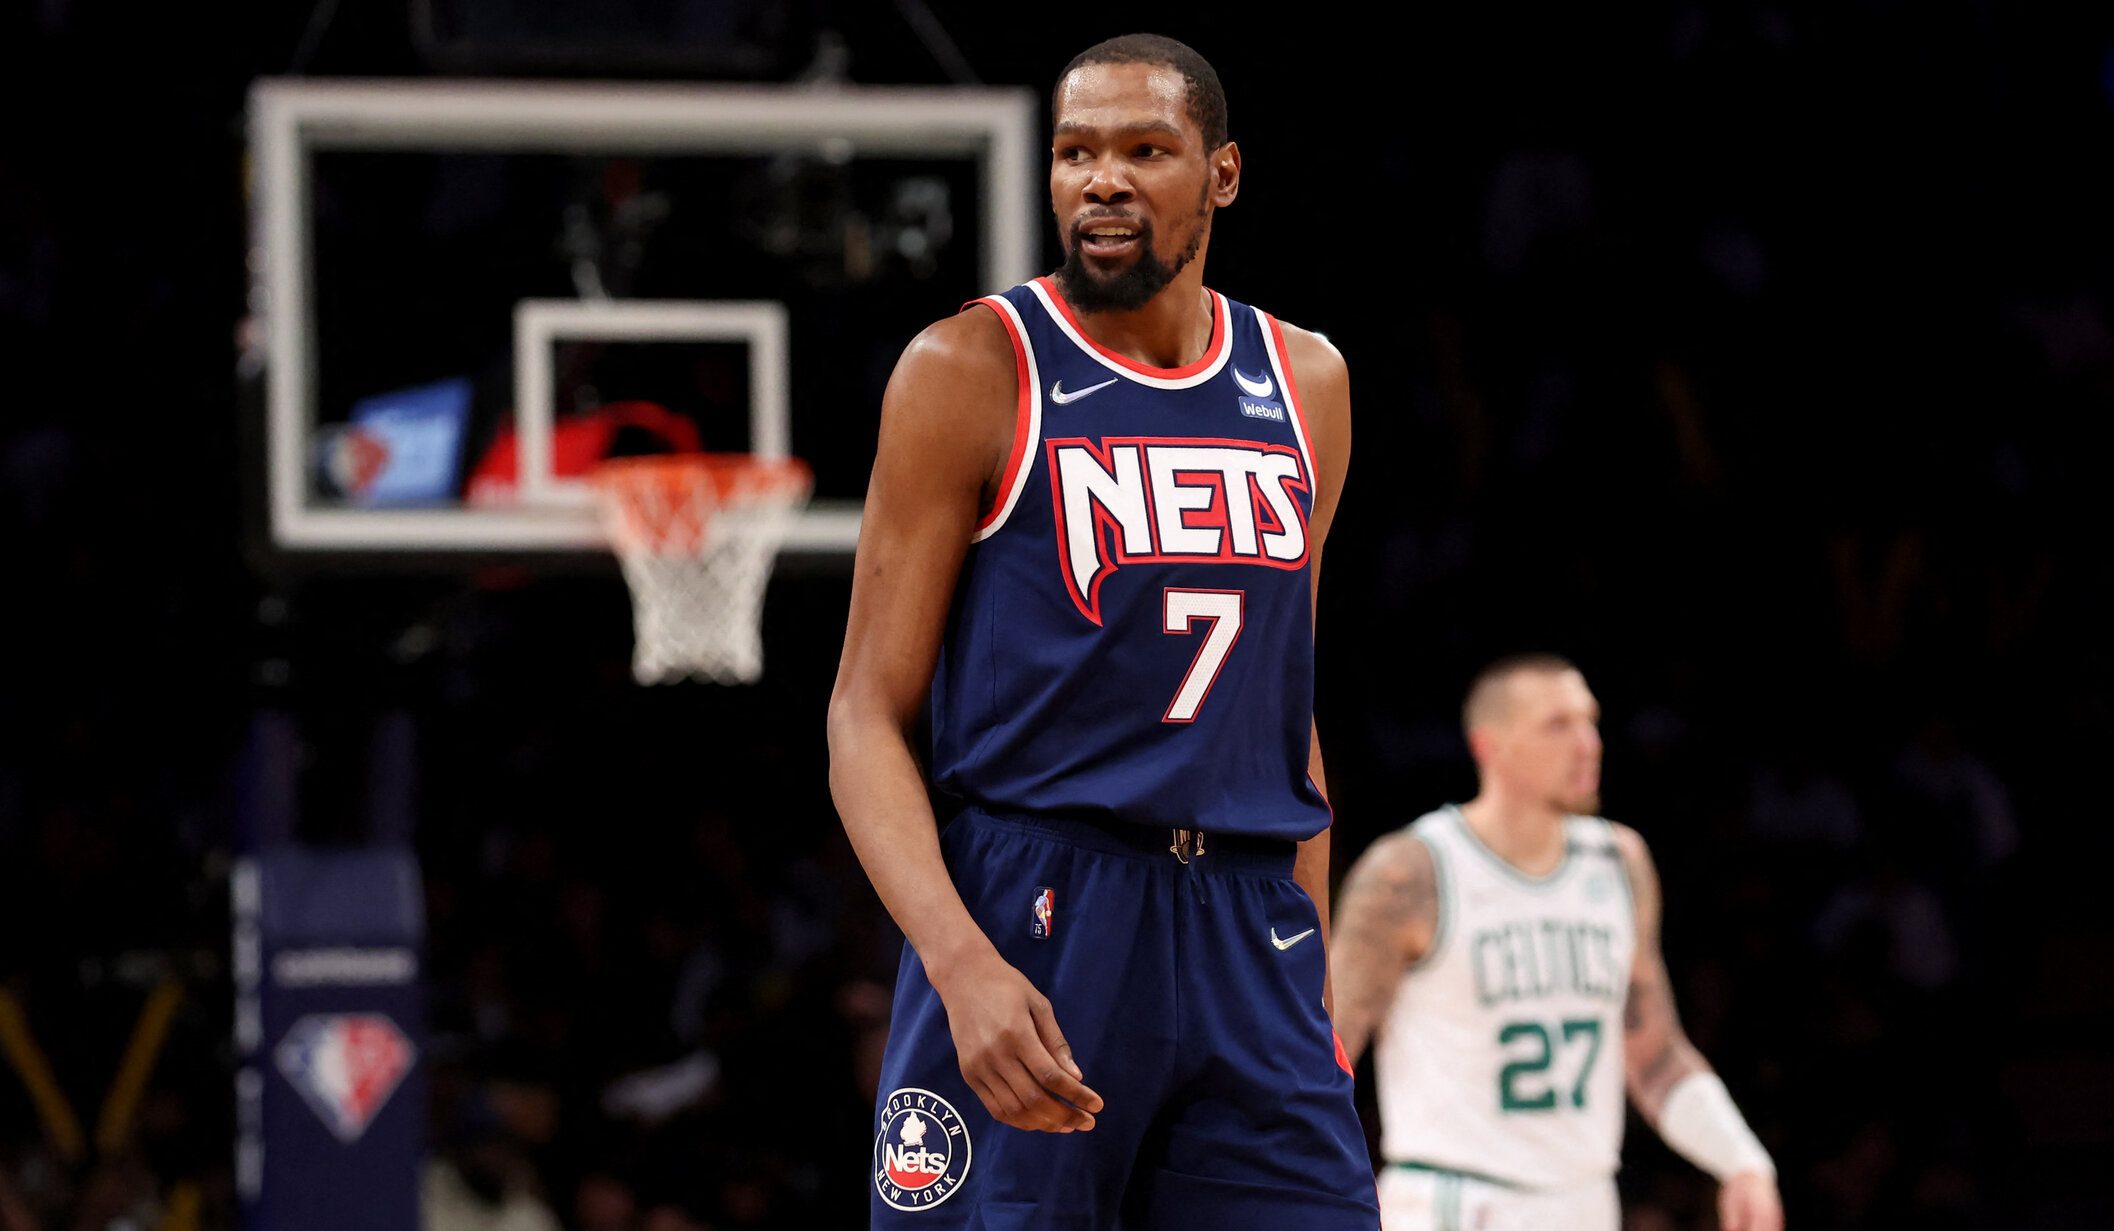 Nets star Kevin Durant claps back at Charles Barkley with savage Rockets diss